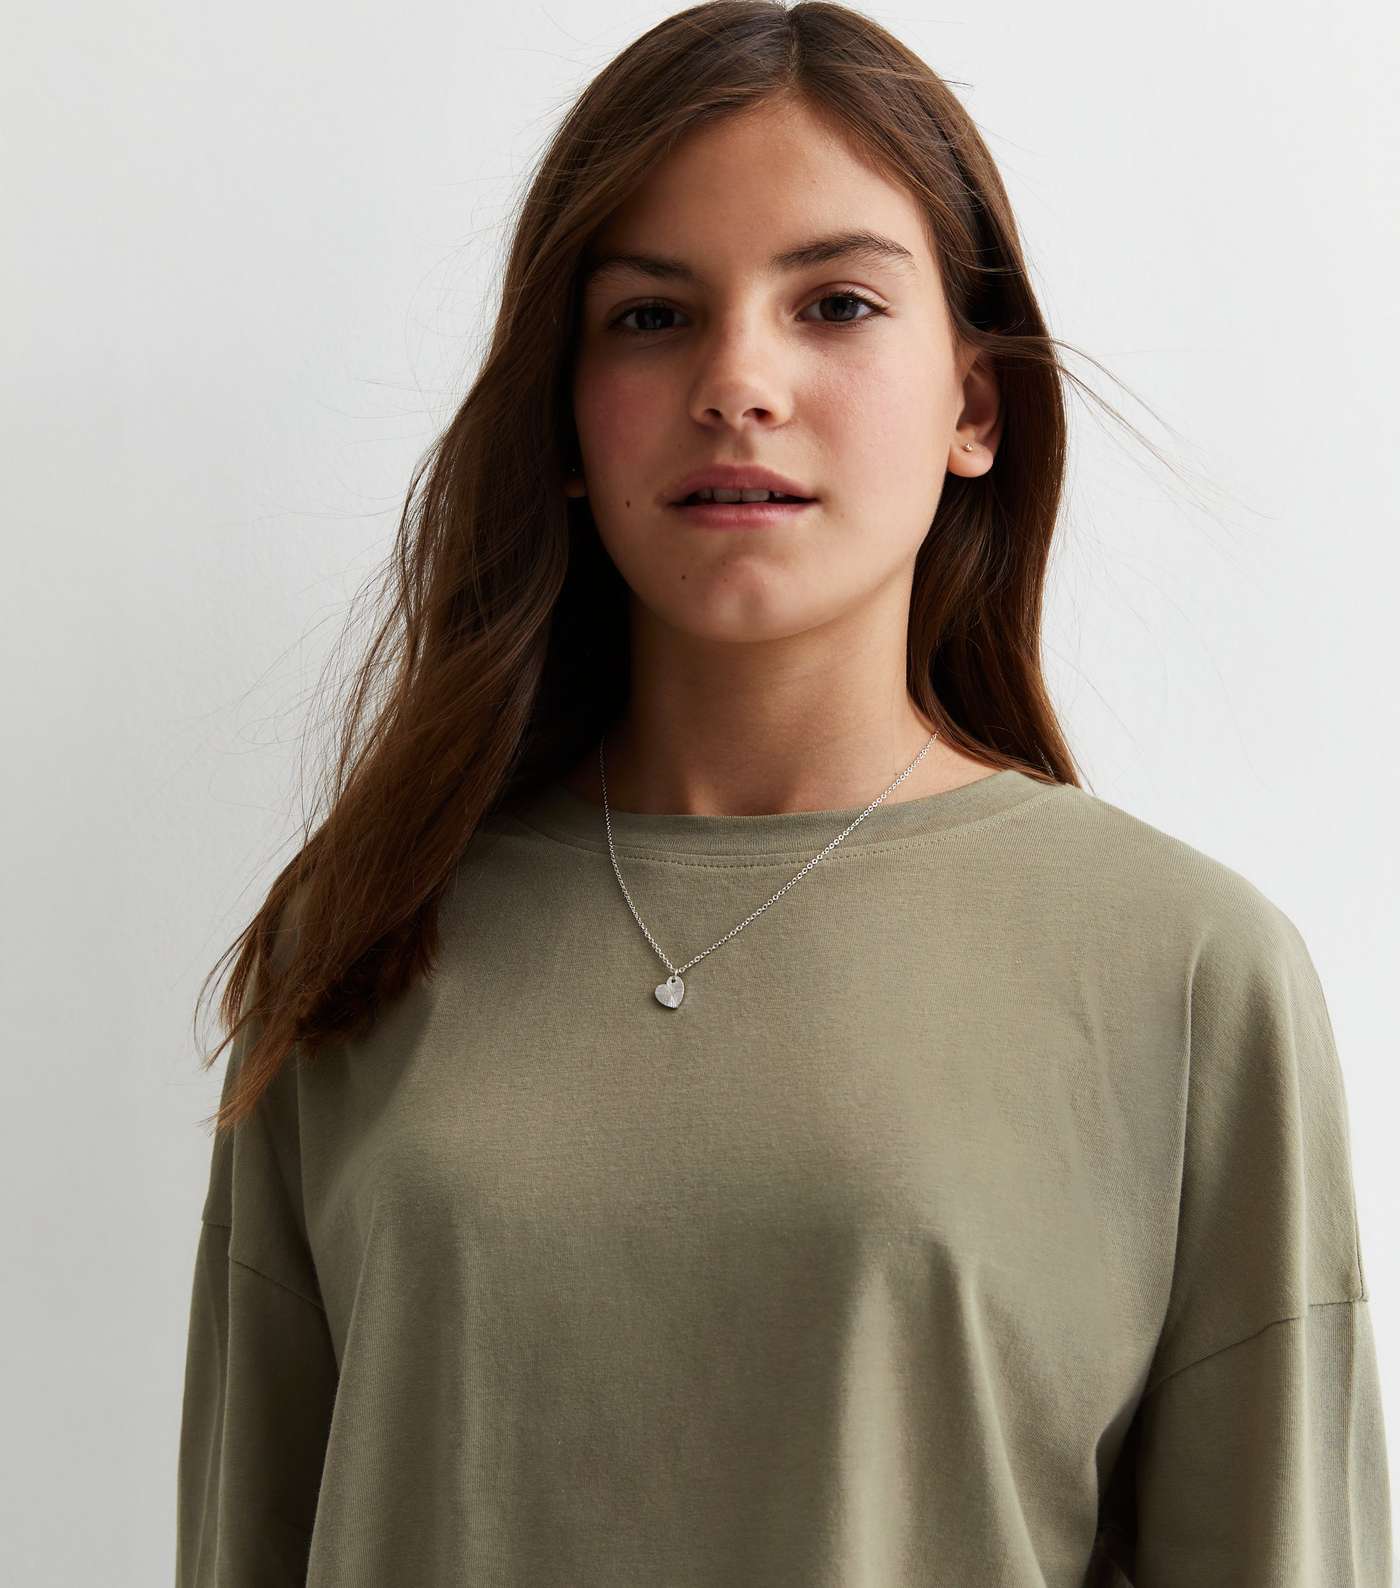 Girls Olive Cotton Long Sleeve Top Image 2